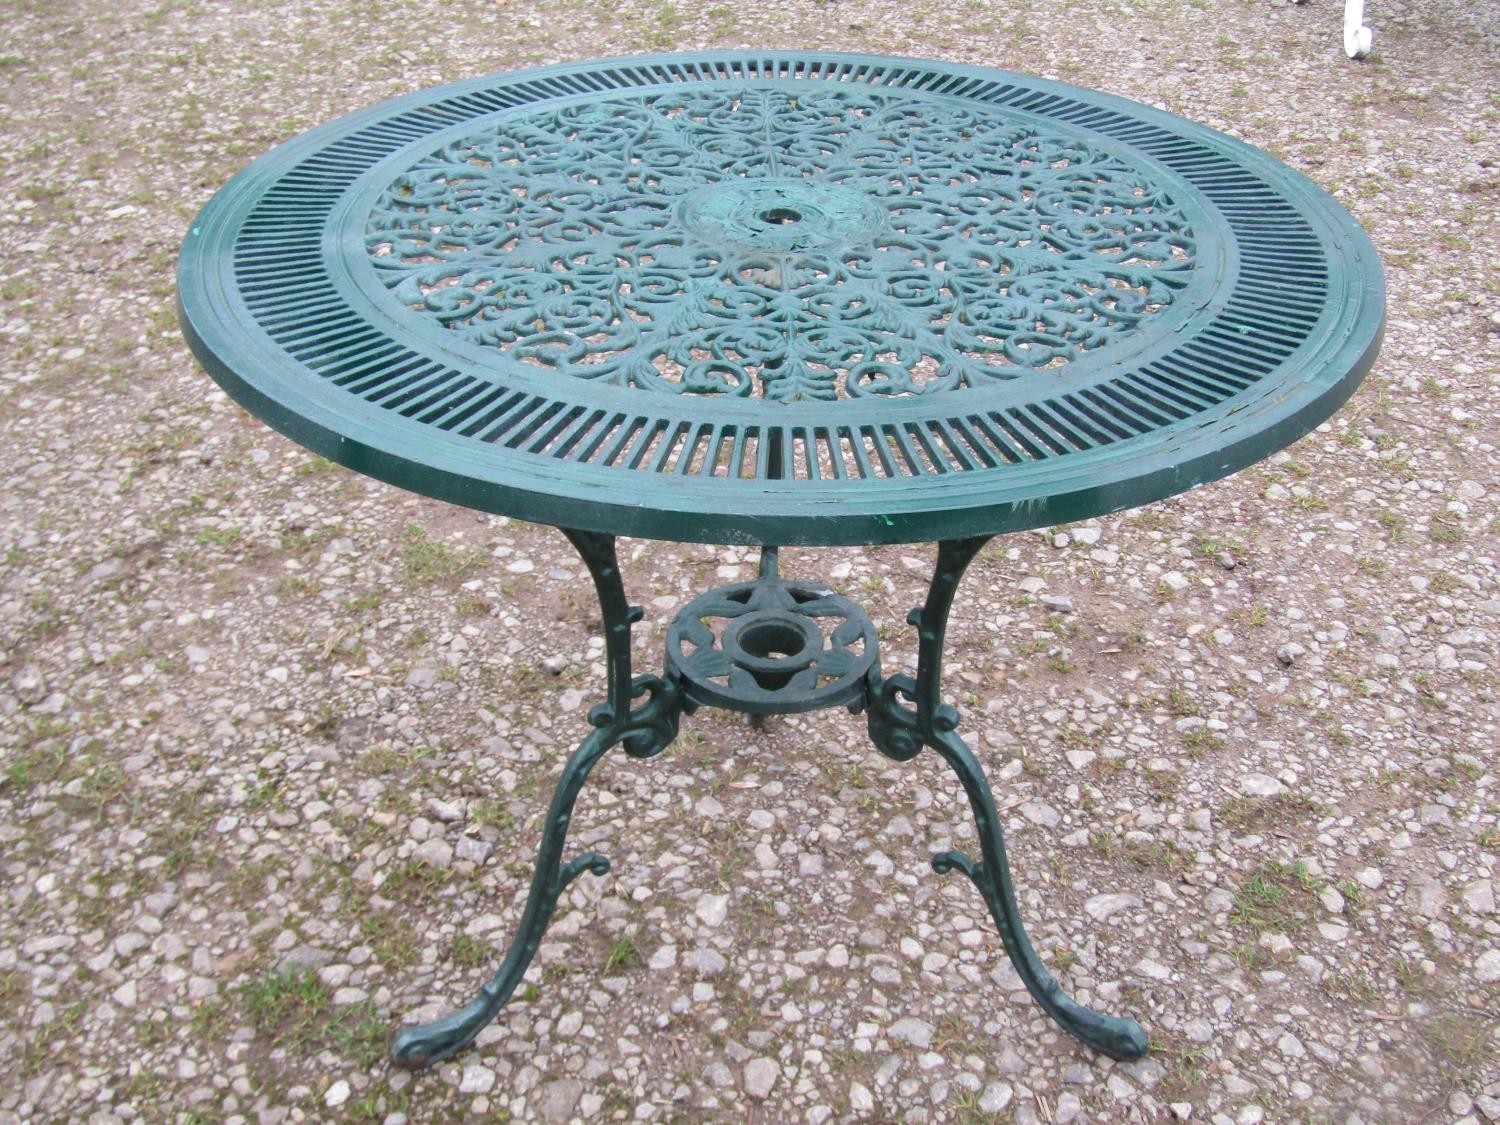 A green painted cast aluminium garden terrace table of circular form, with decorative pierced top, - Image 5 of 6